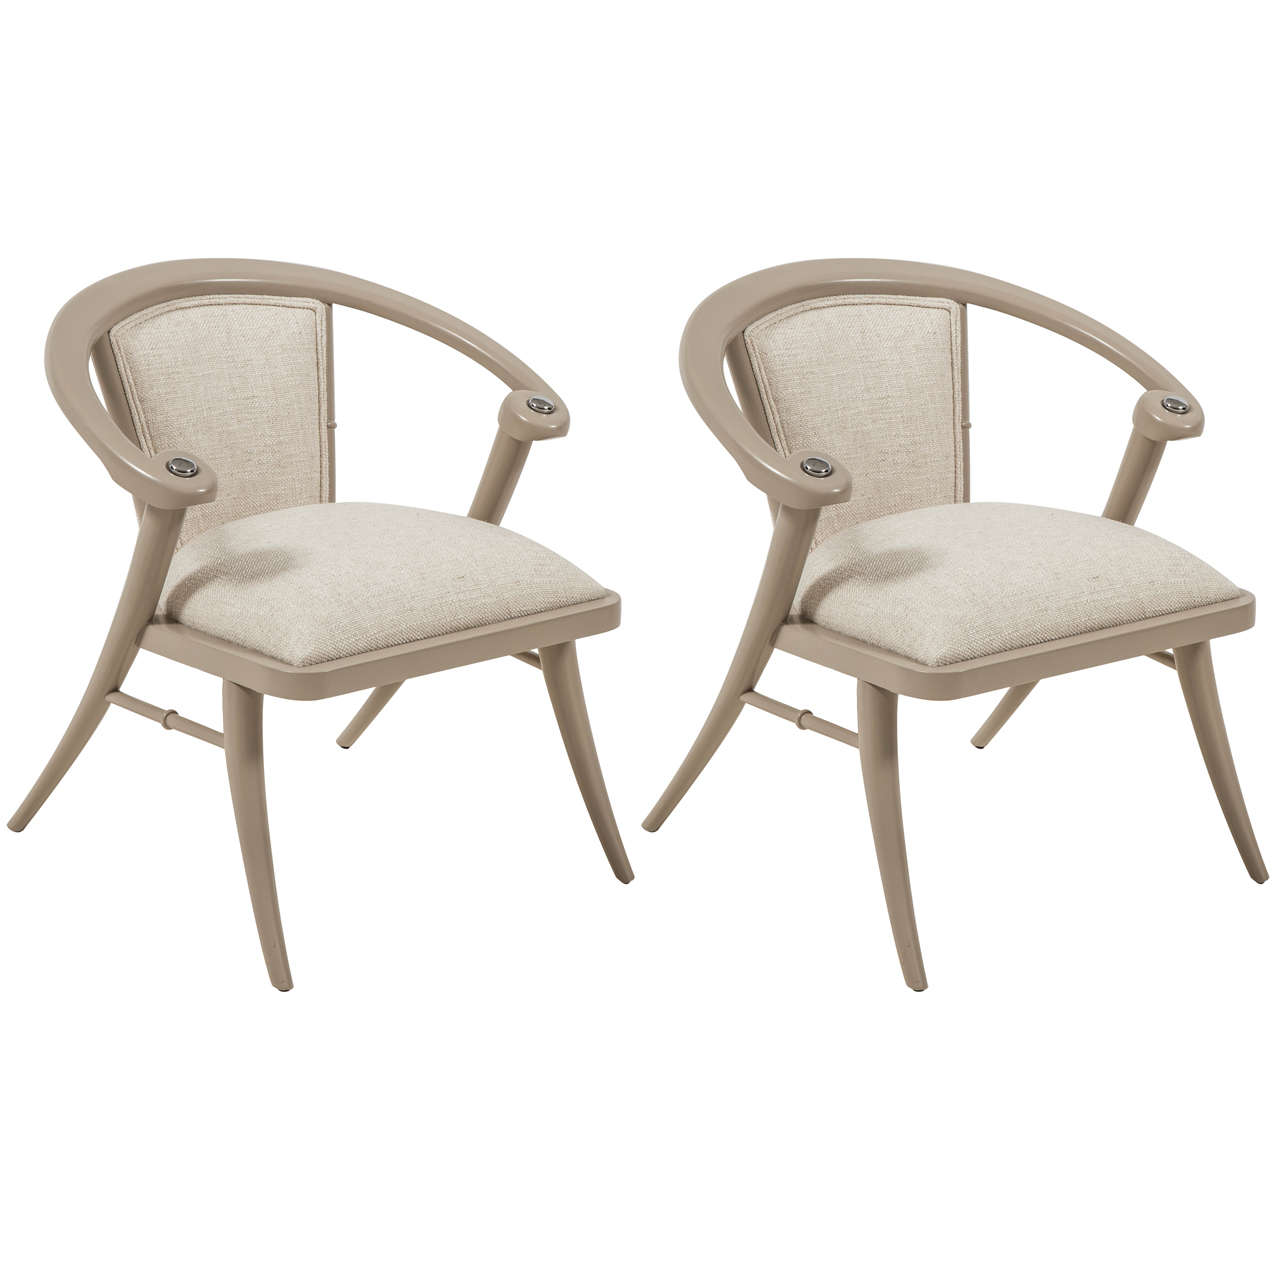 Pair of Lacquered Chairs